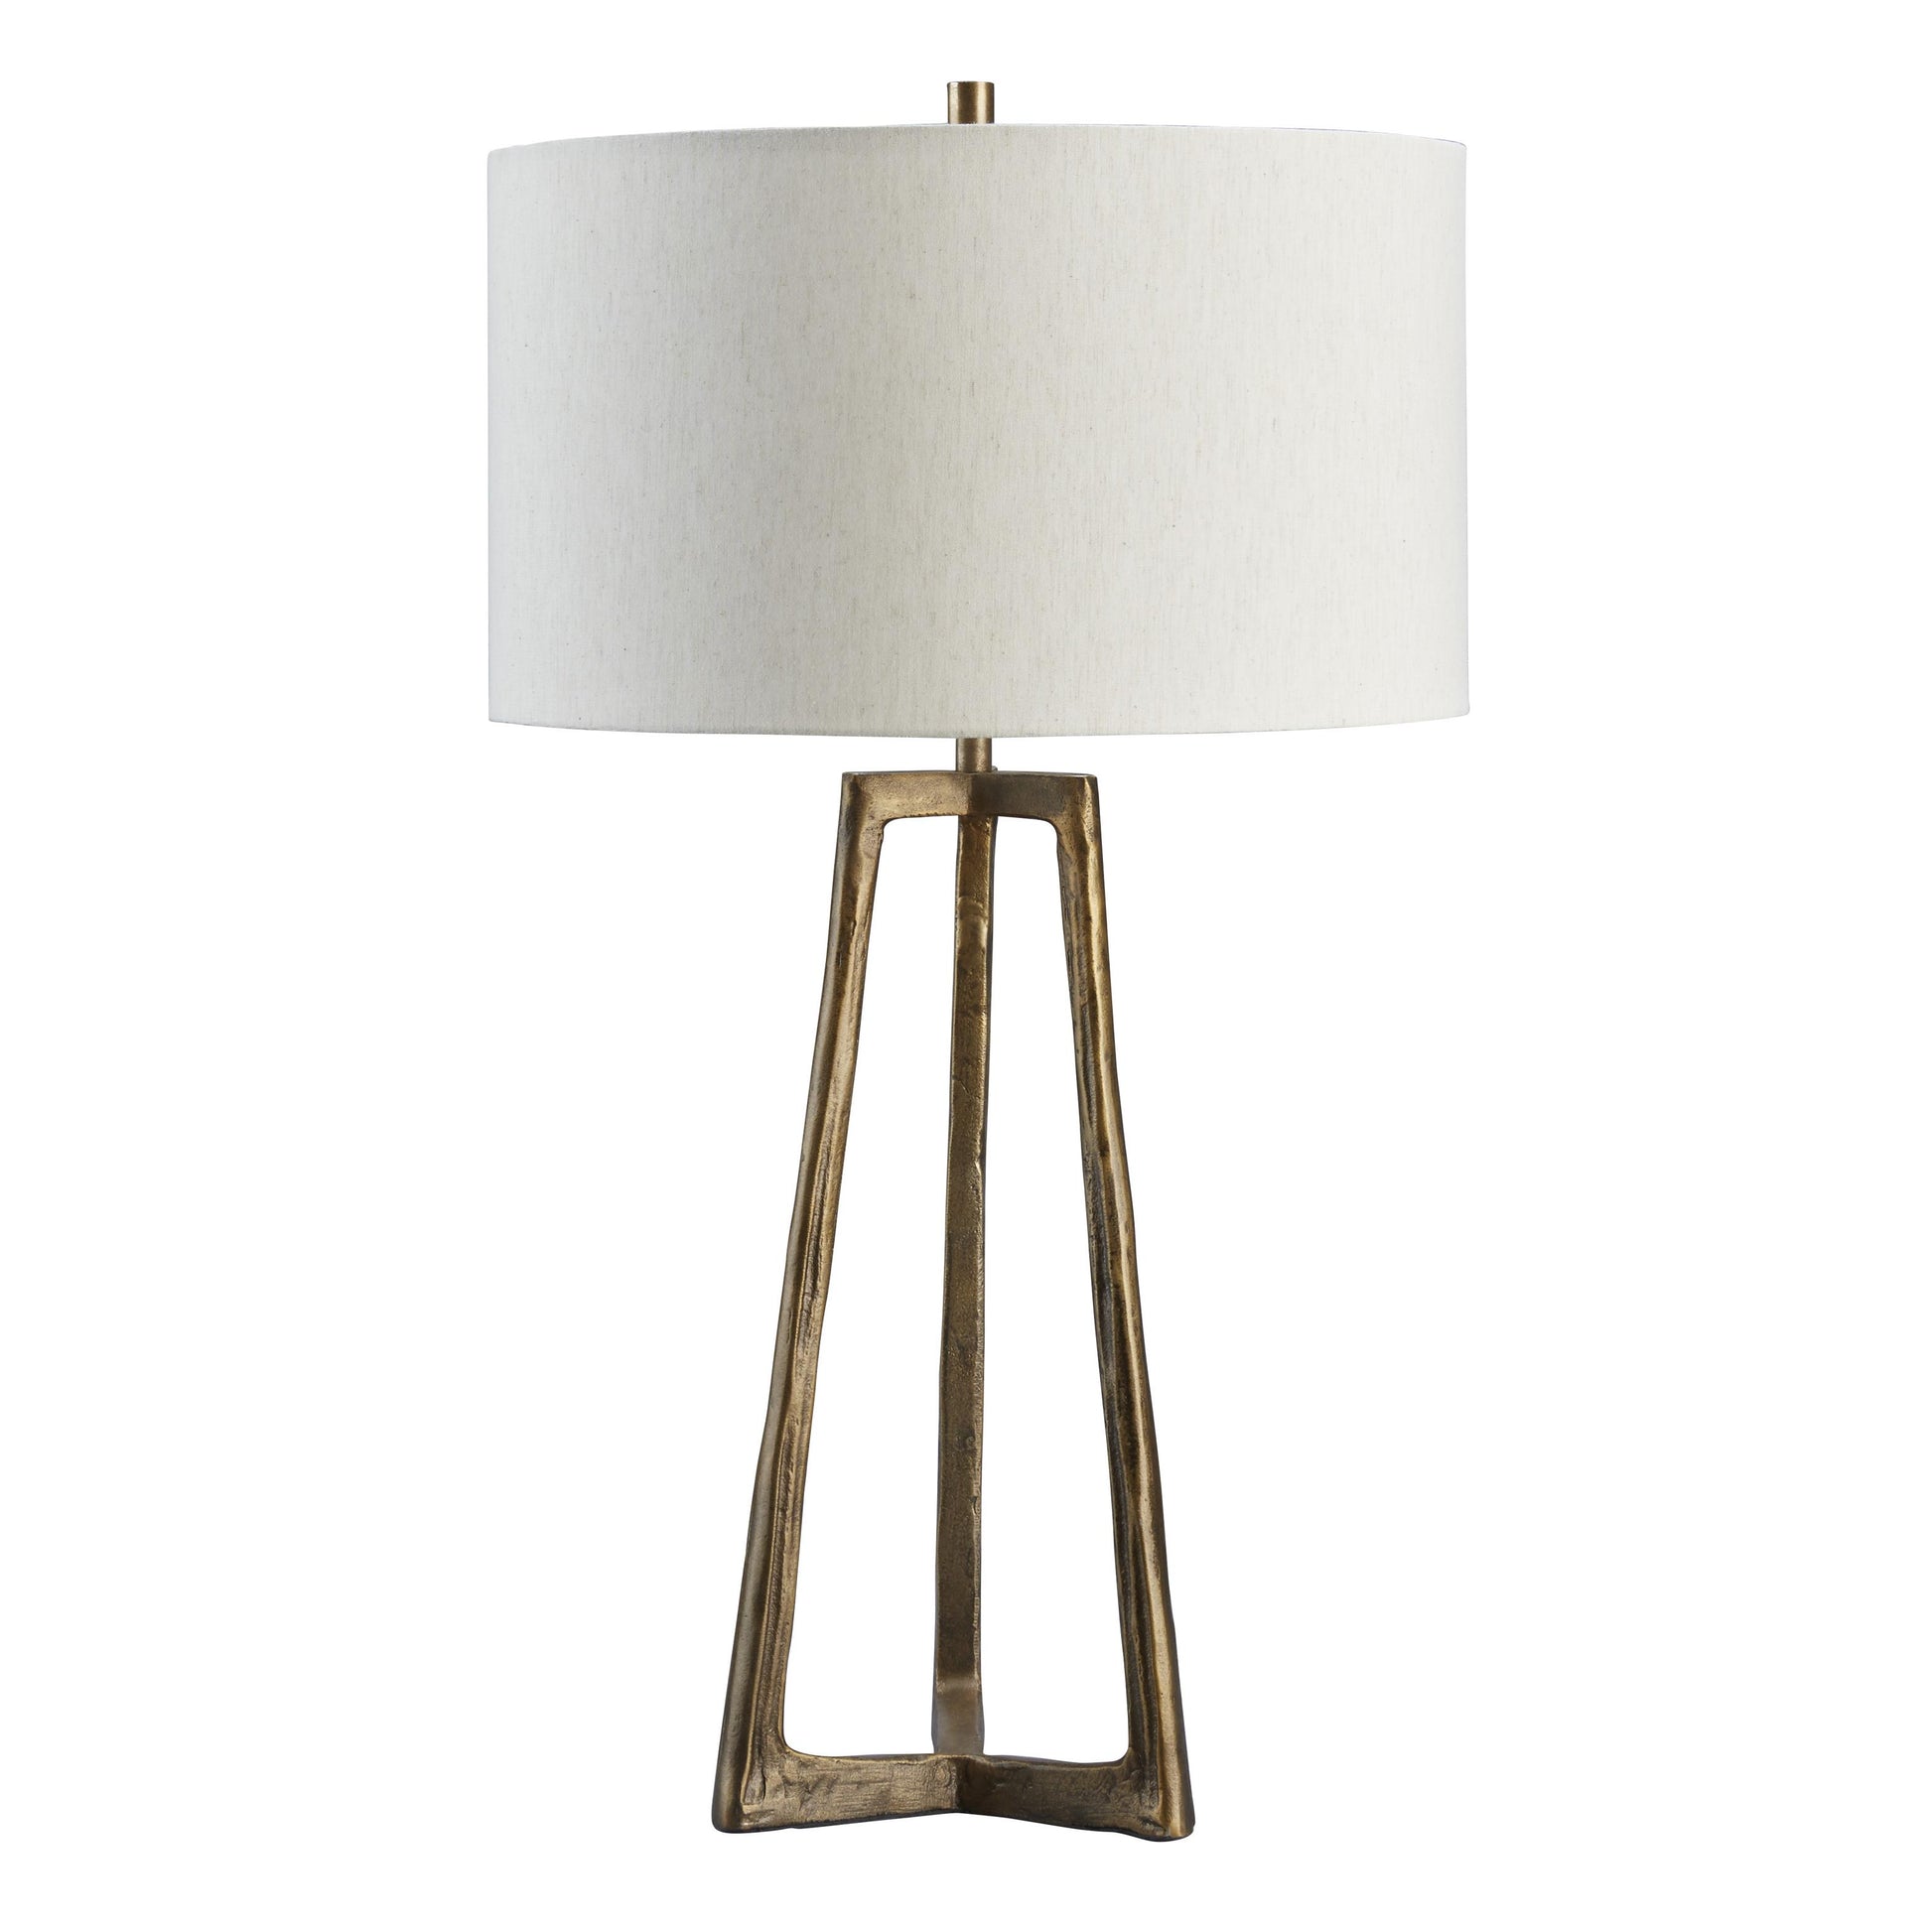 Signature Design by Ashley Ryandale Table Lamp L208354 IMAGE 1